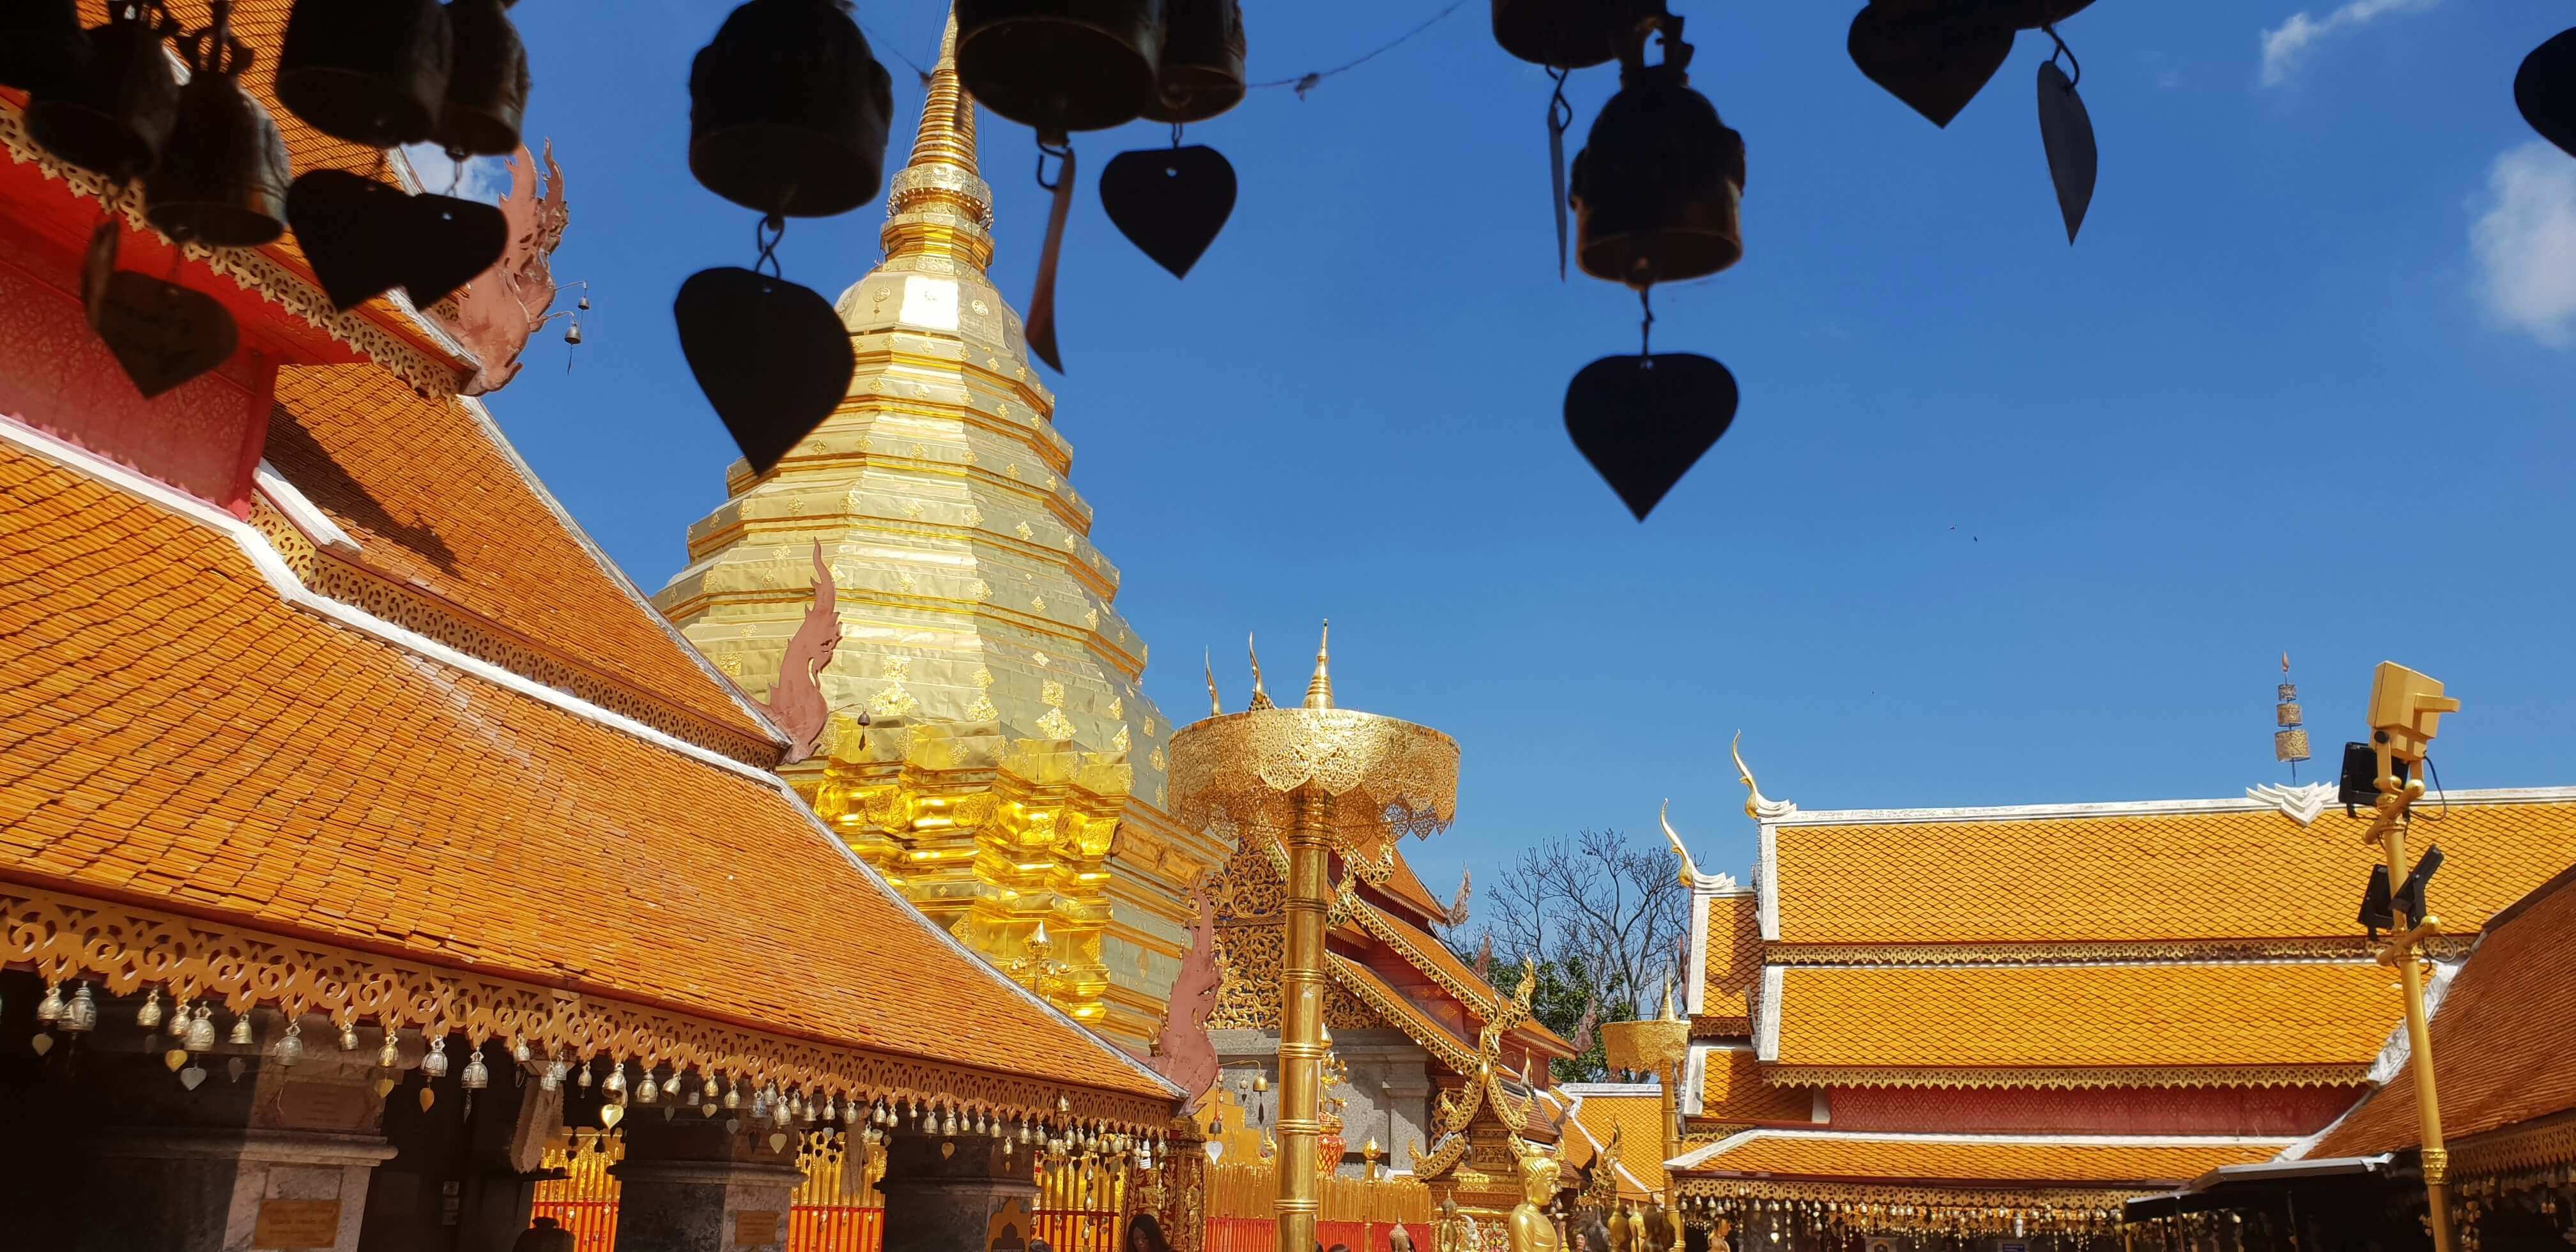 Chiang Mai covers the cultural aspect of Thailand in the 10 day Thailand itinerary